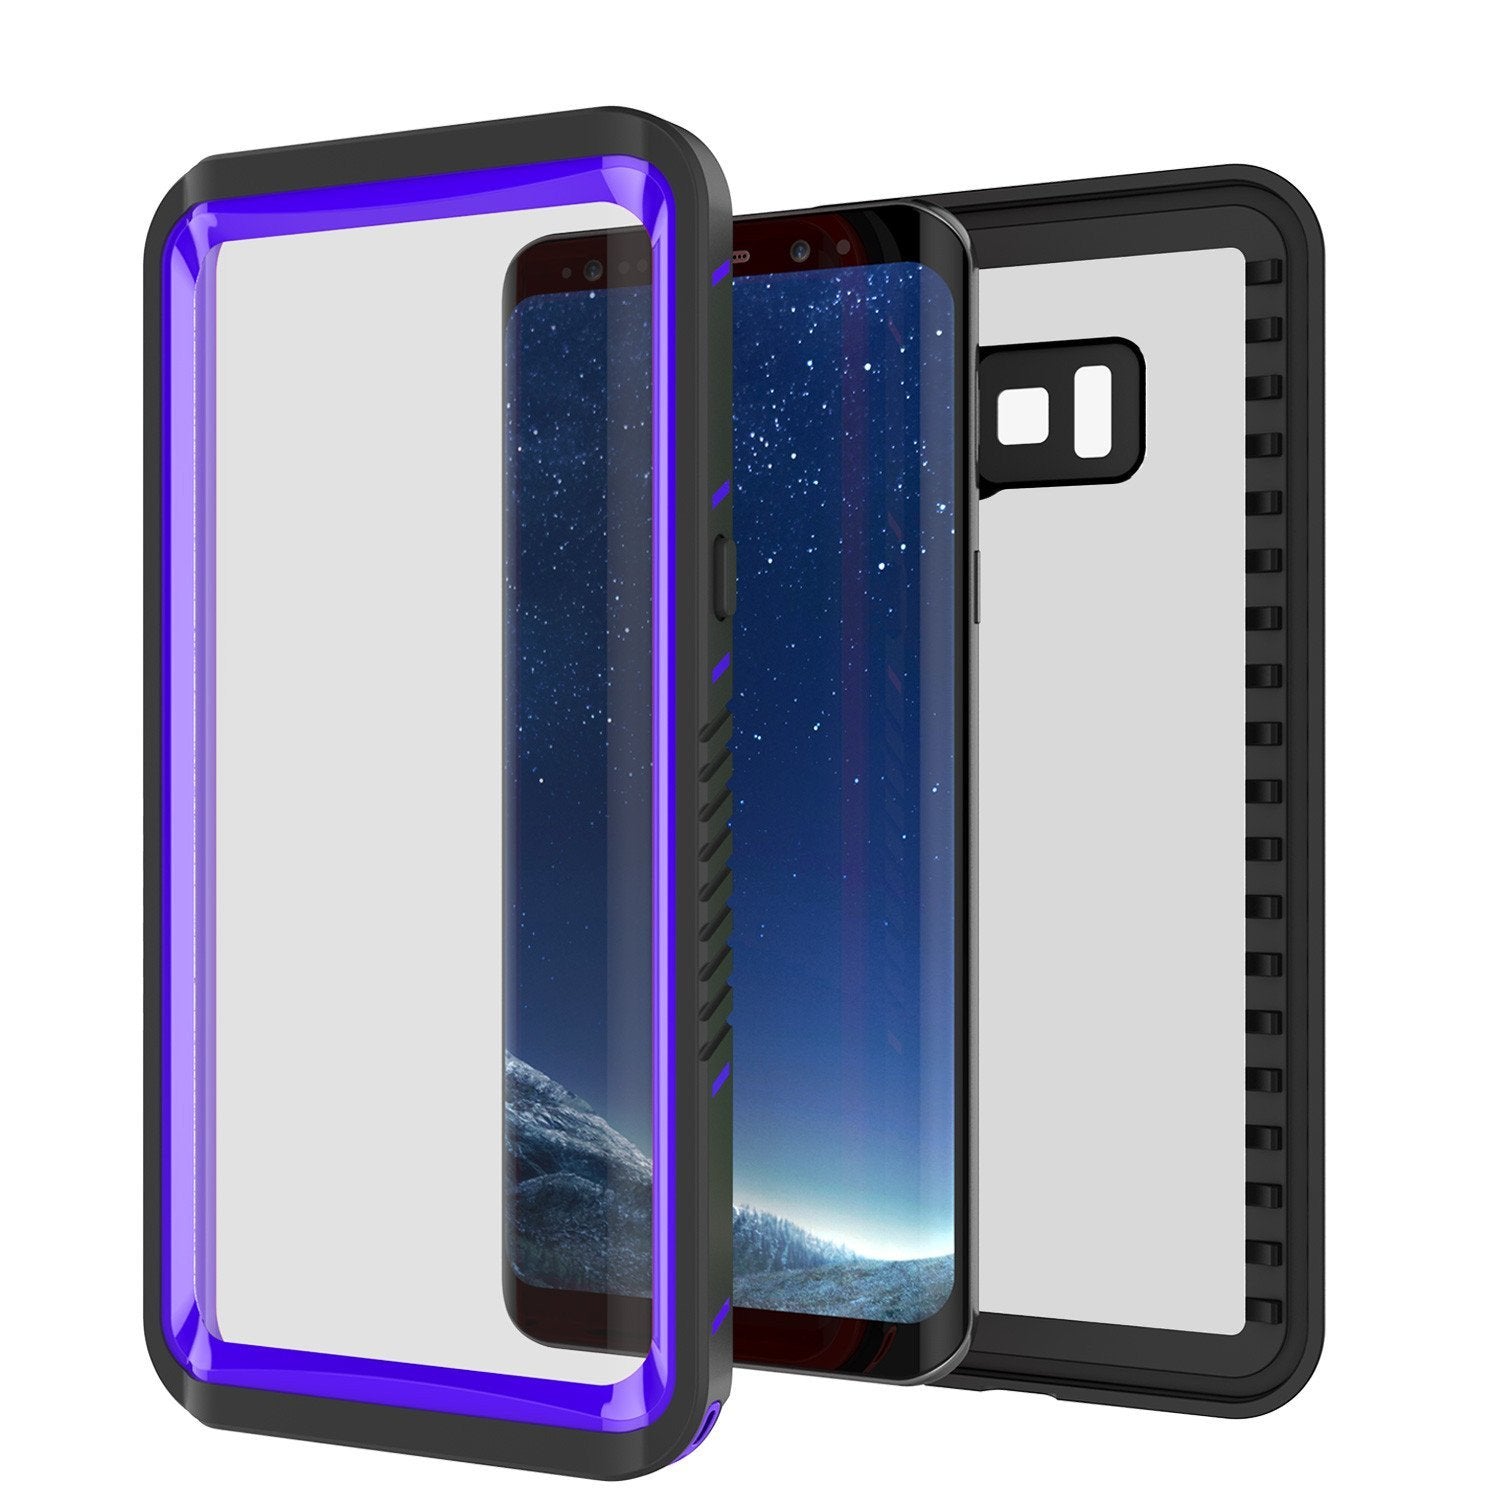 Galaxy S8 PLUS Case, Punkcase [Extreme Series] Armor Purple Cover